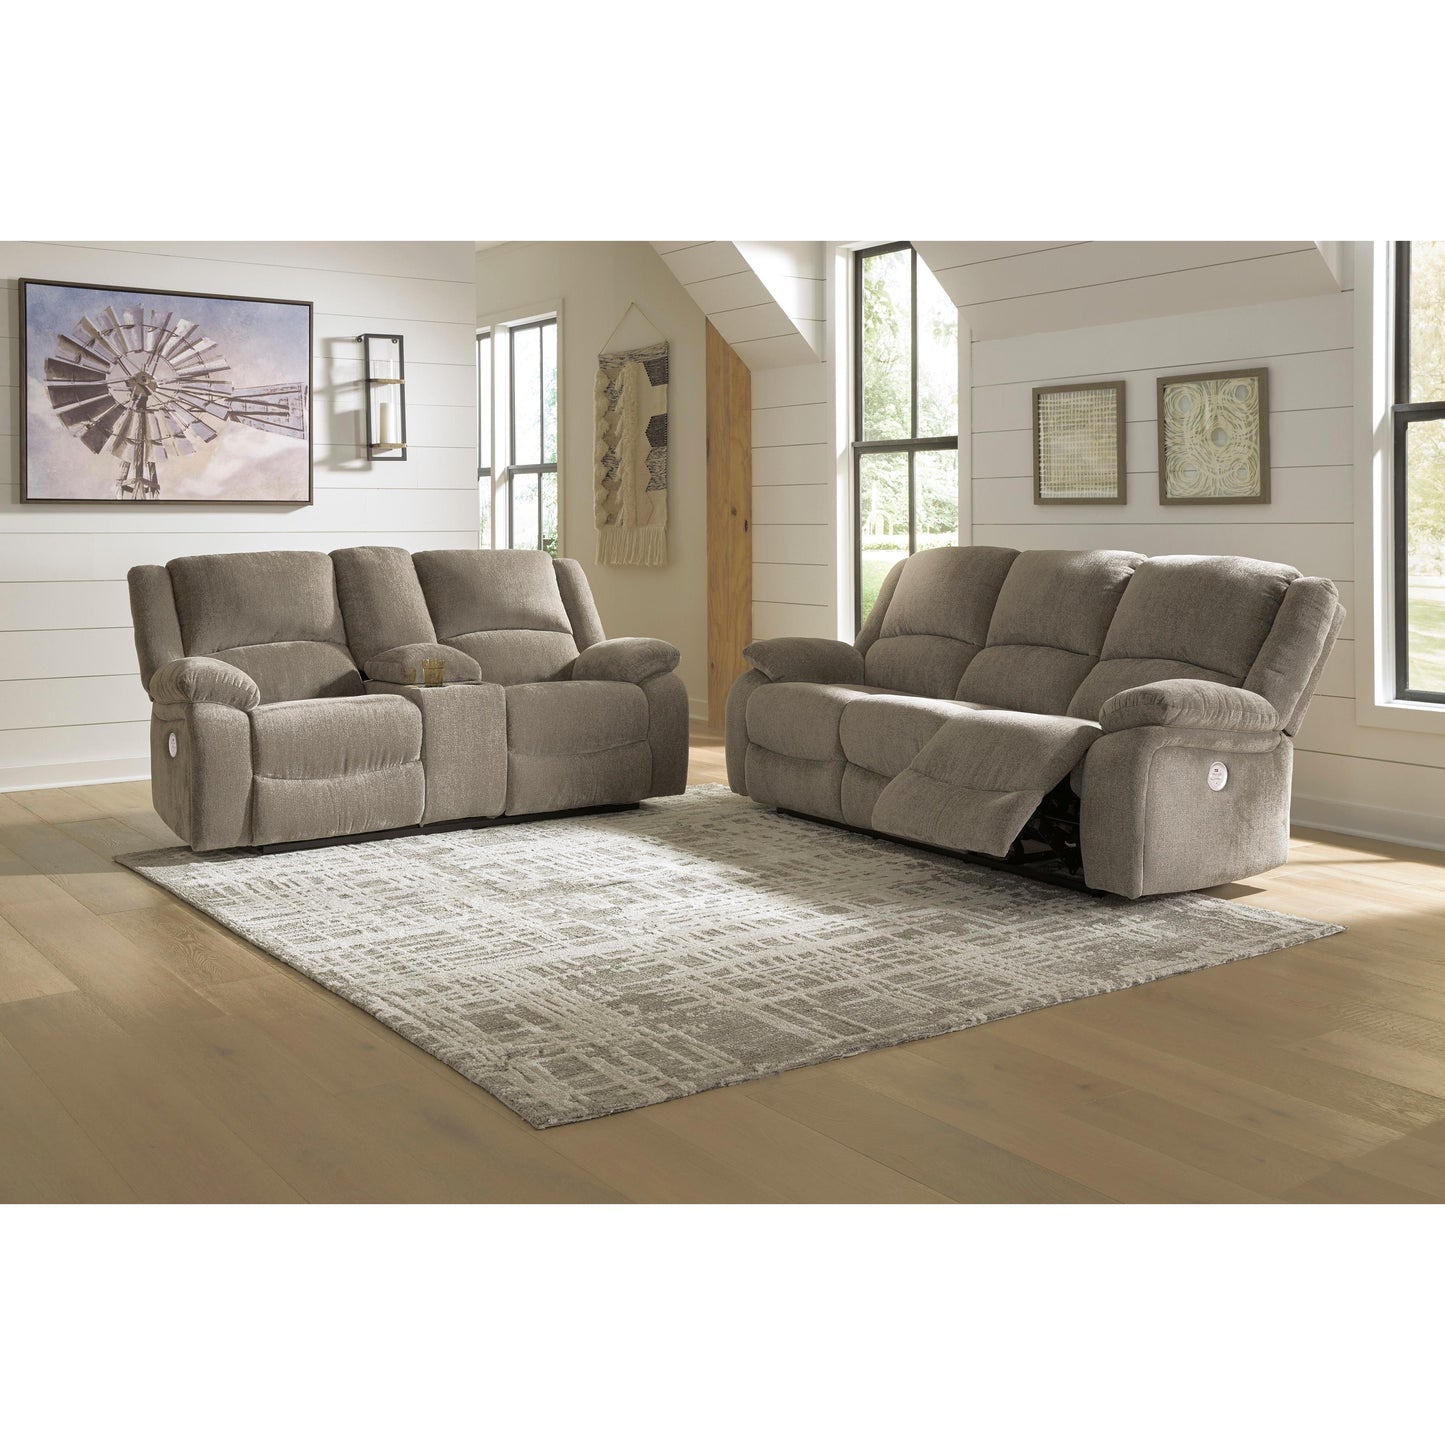 Signature Design by Ashley Draycoll Power Reclining Fabric Loveseat 7650596